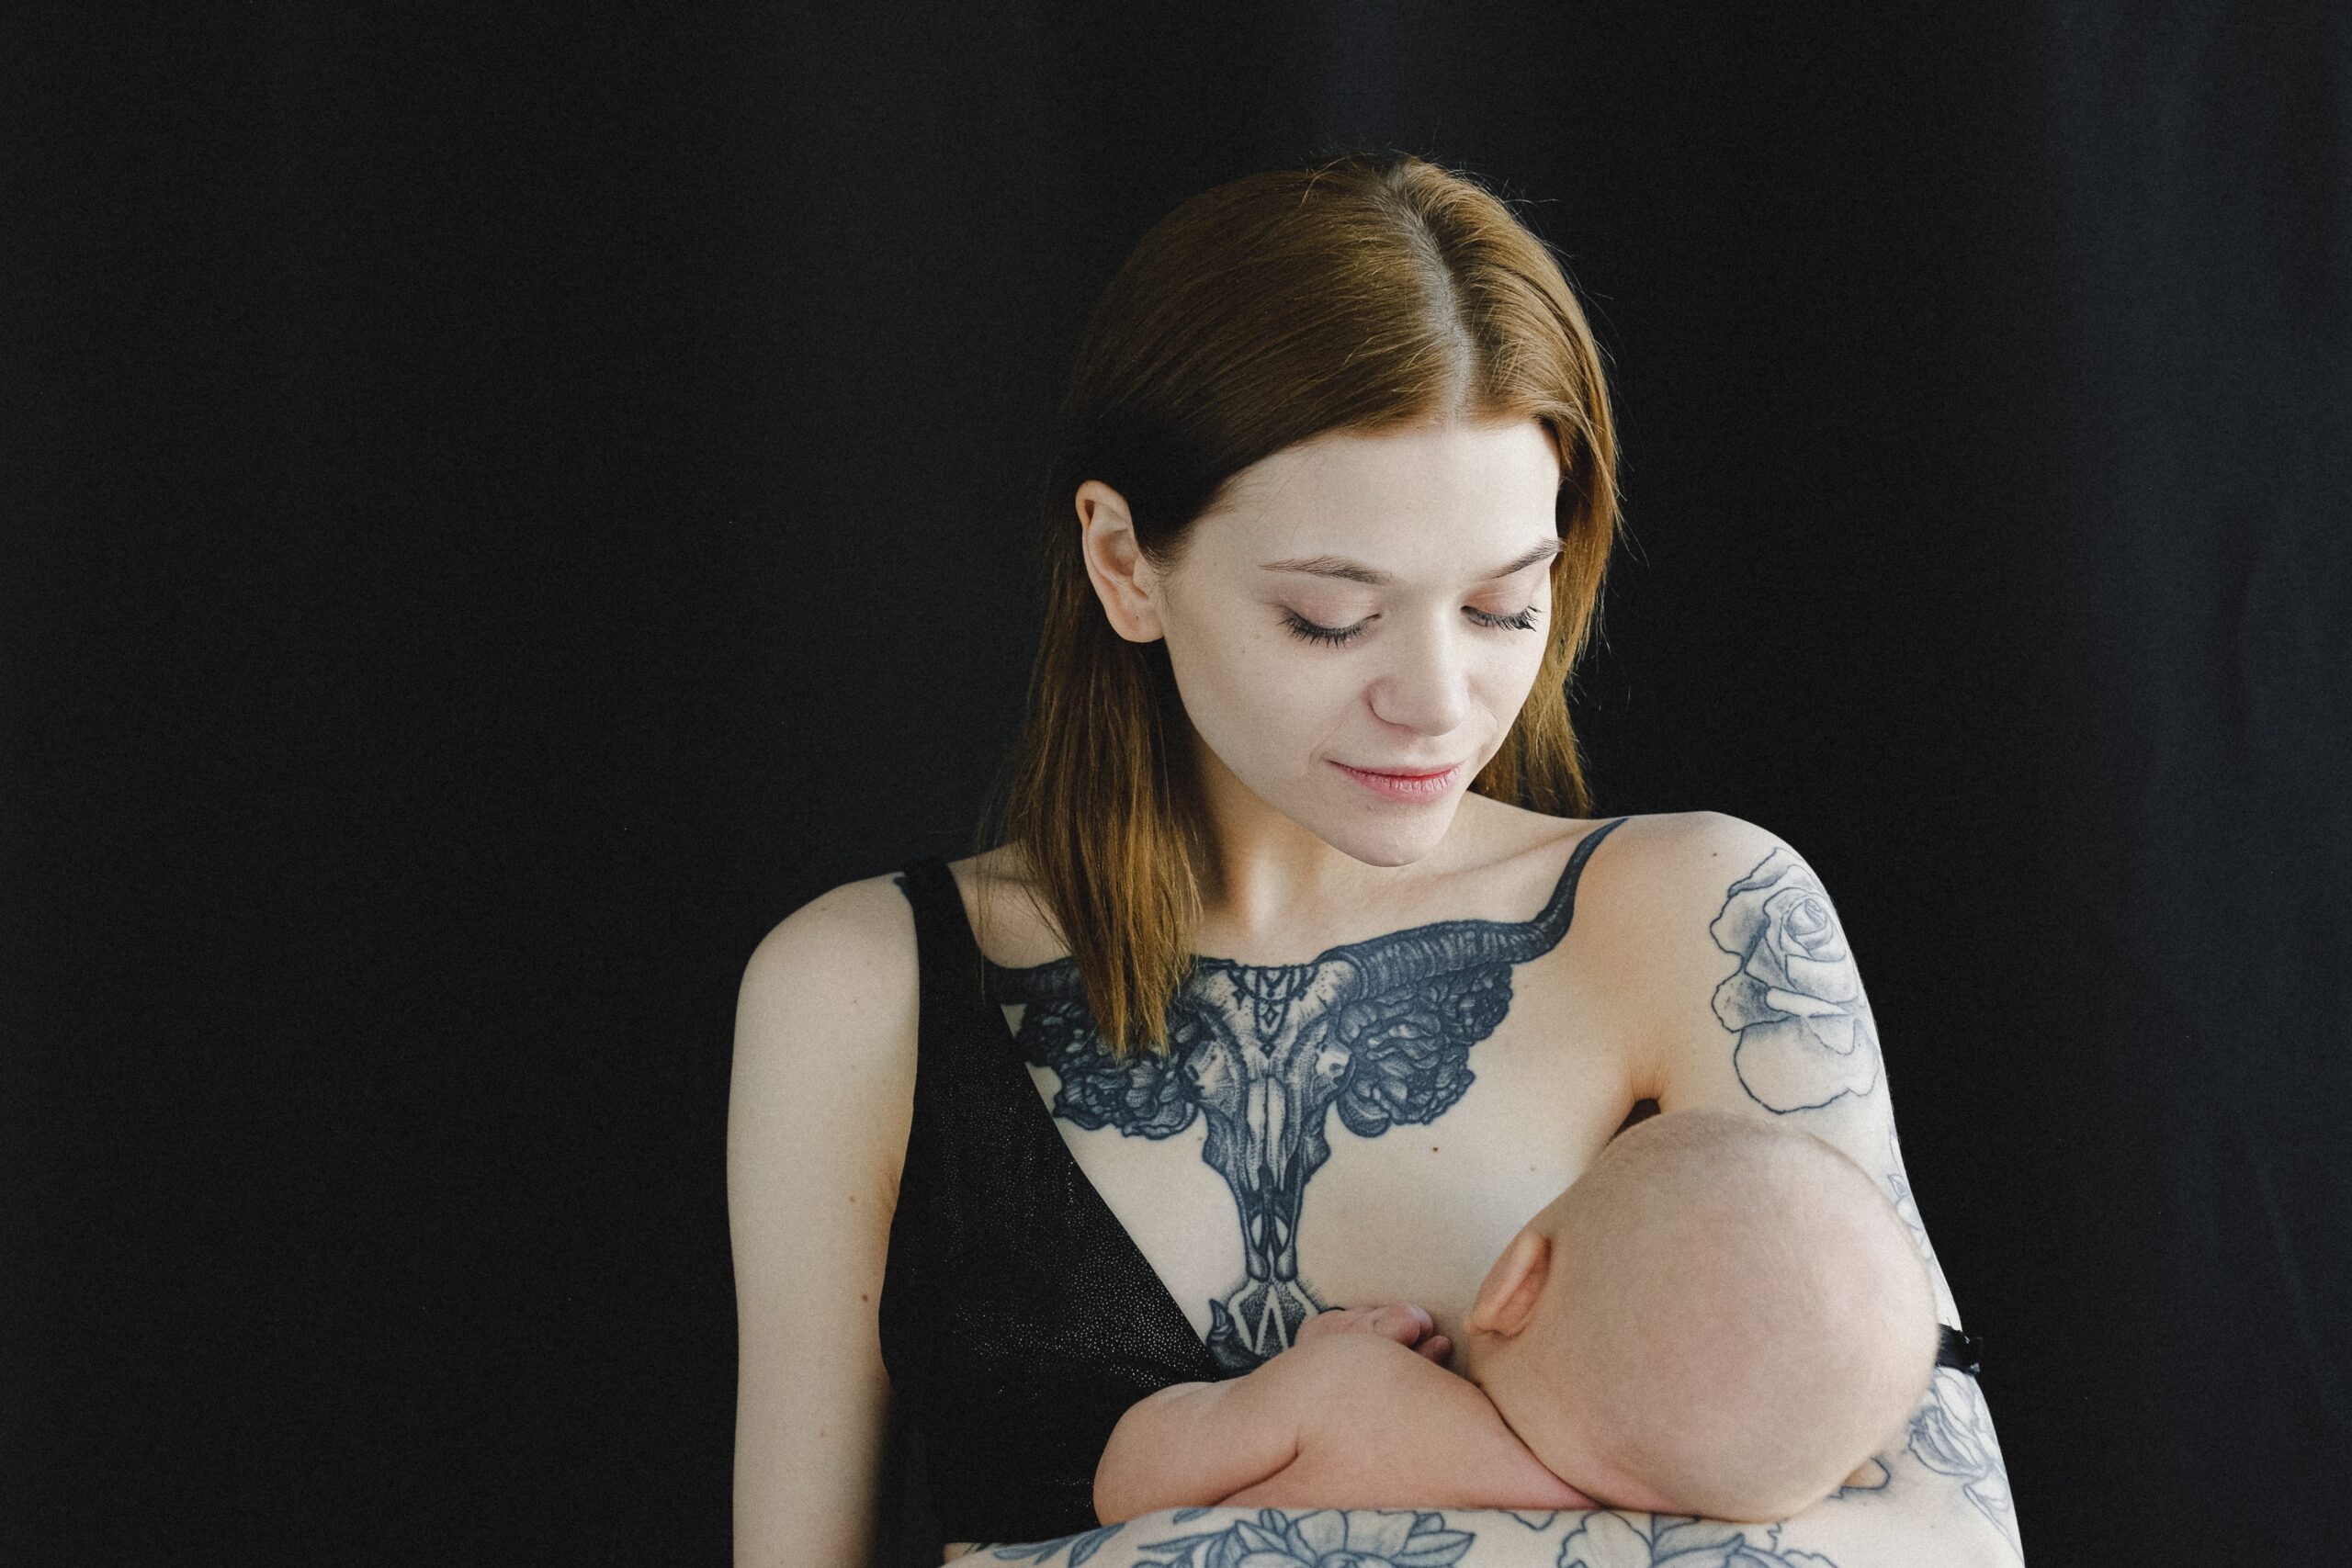 "Switching baby from breastmilk to formula cold turkey"